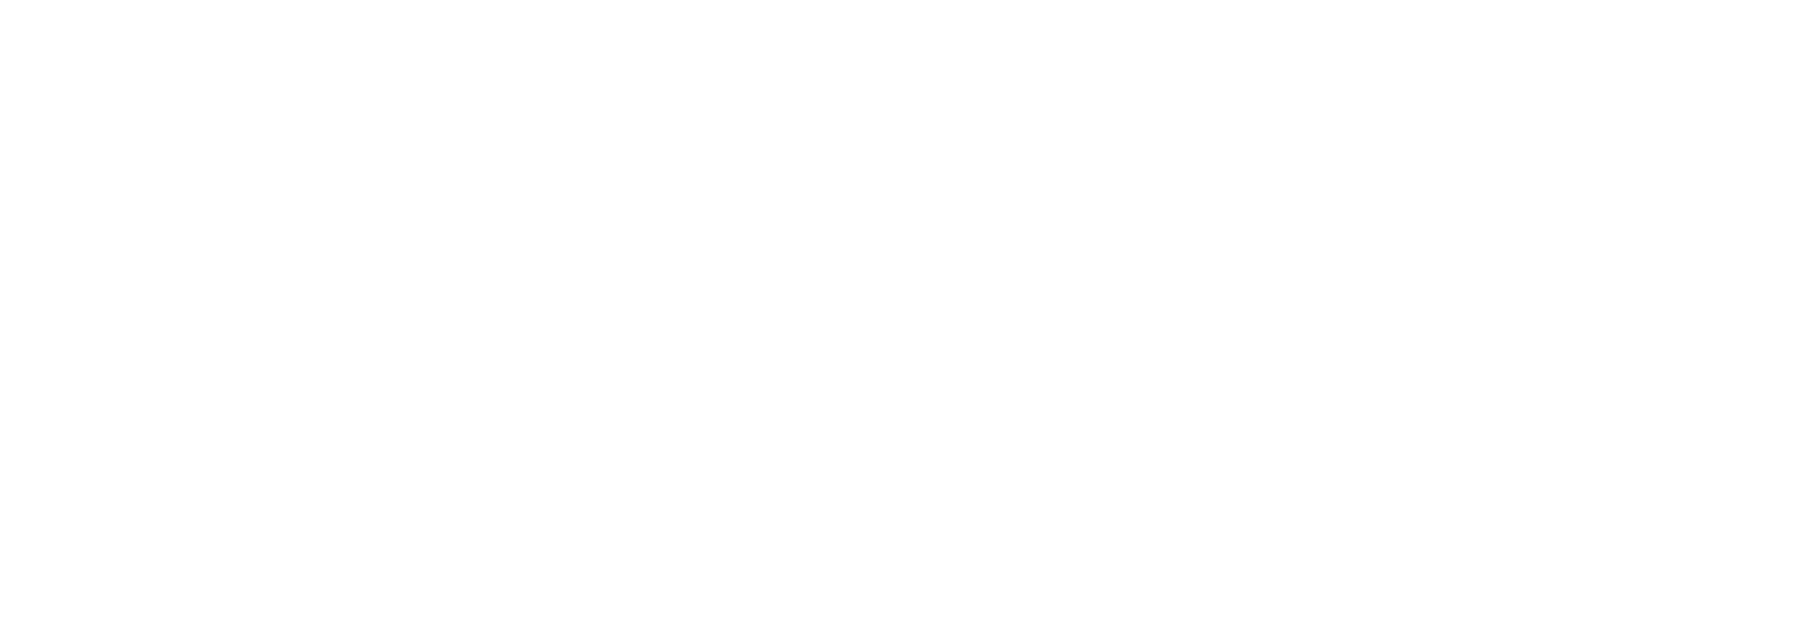 All in the Family title